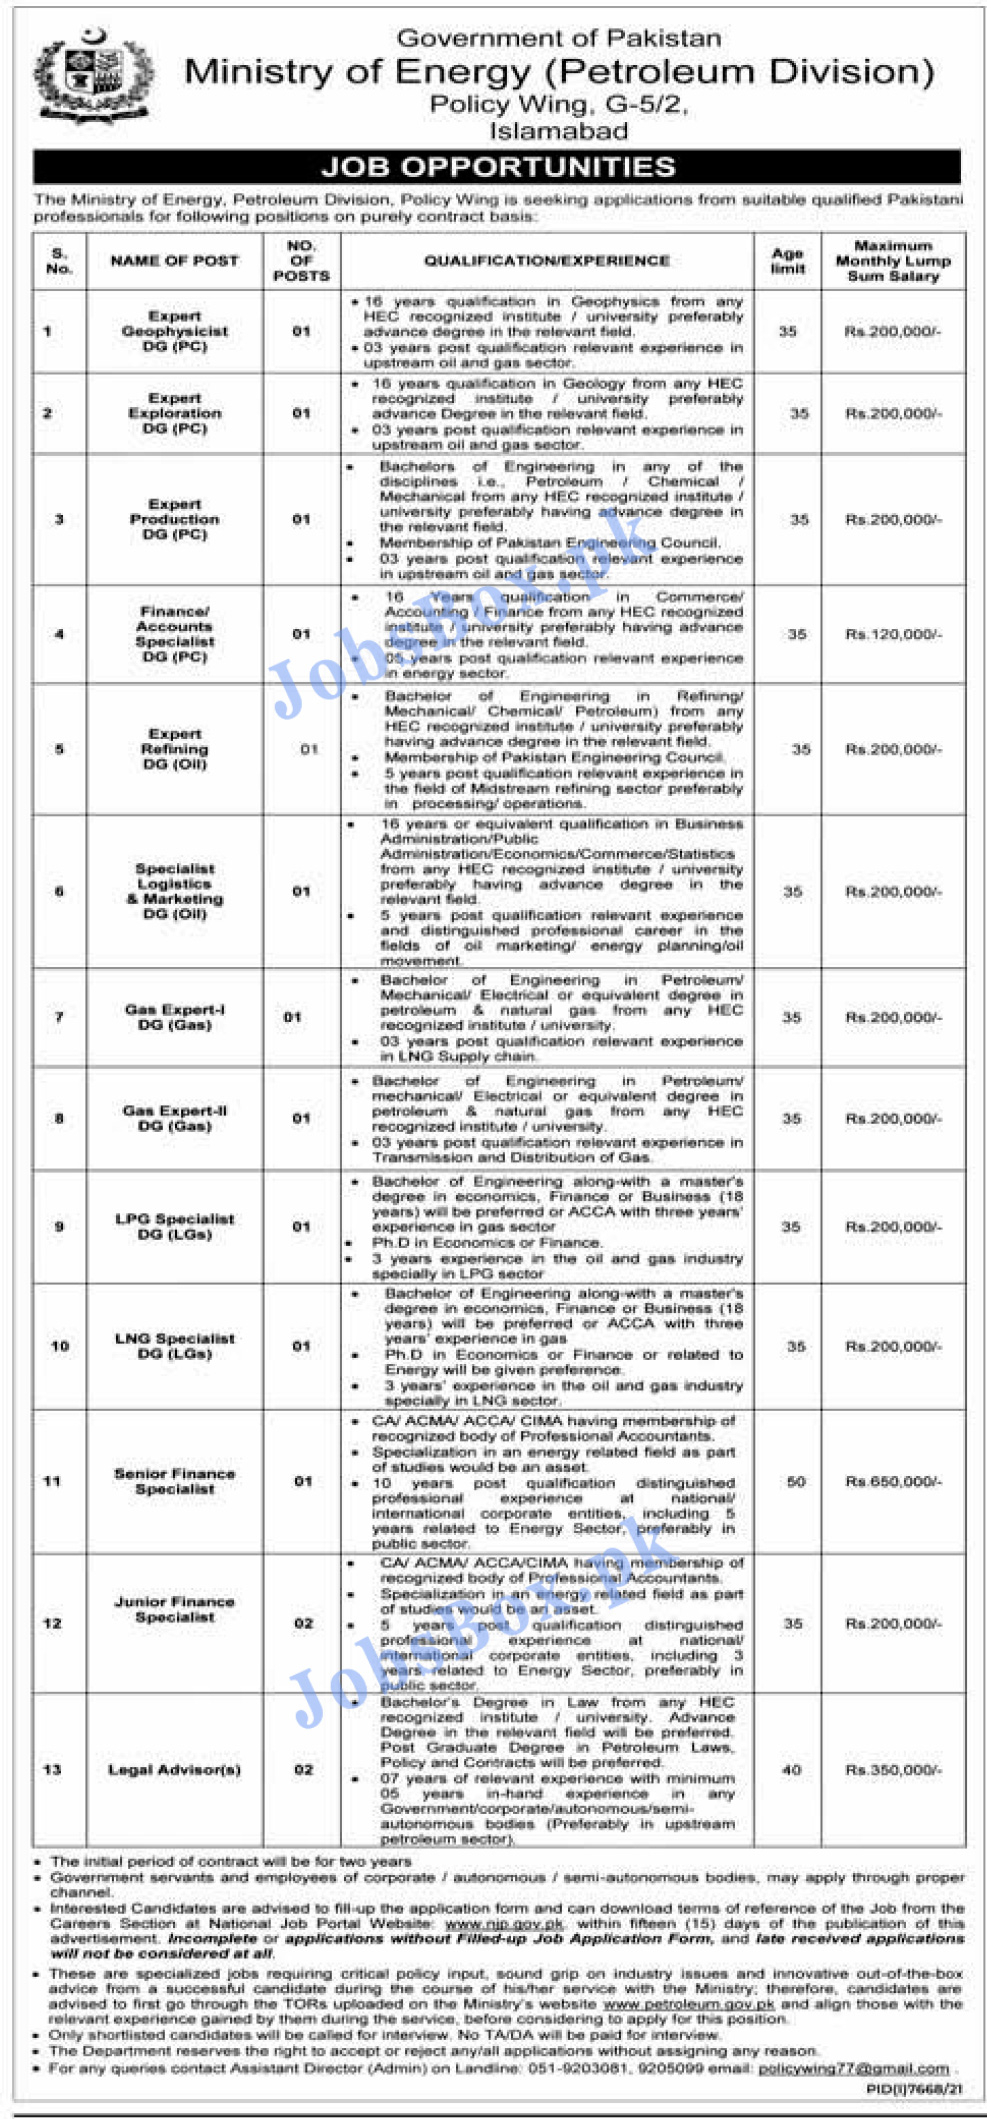 Ministry of Energy Petroleum Division Islamabad jobs 2022 Application Form